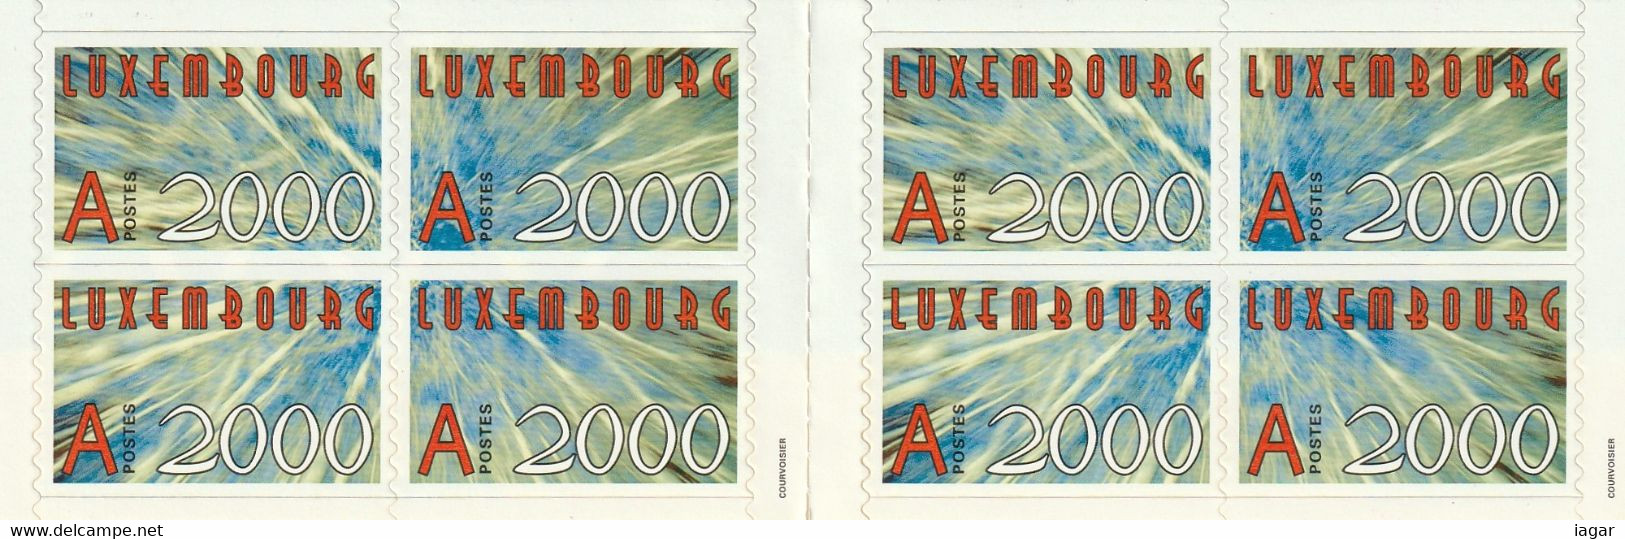 LUXEMBOURG 2000 - BOOKLET 2000 AND LETTER 'A' - Booklets